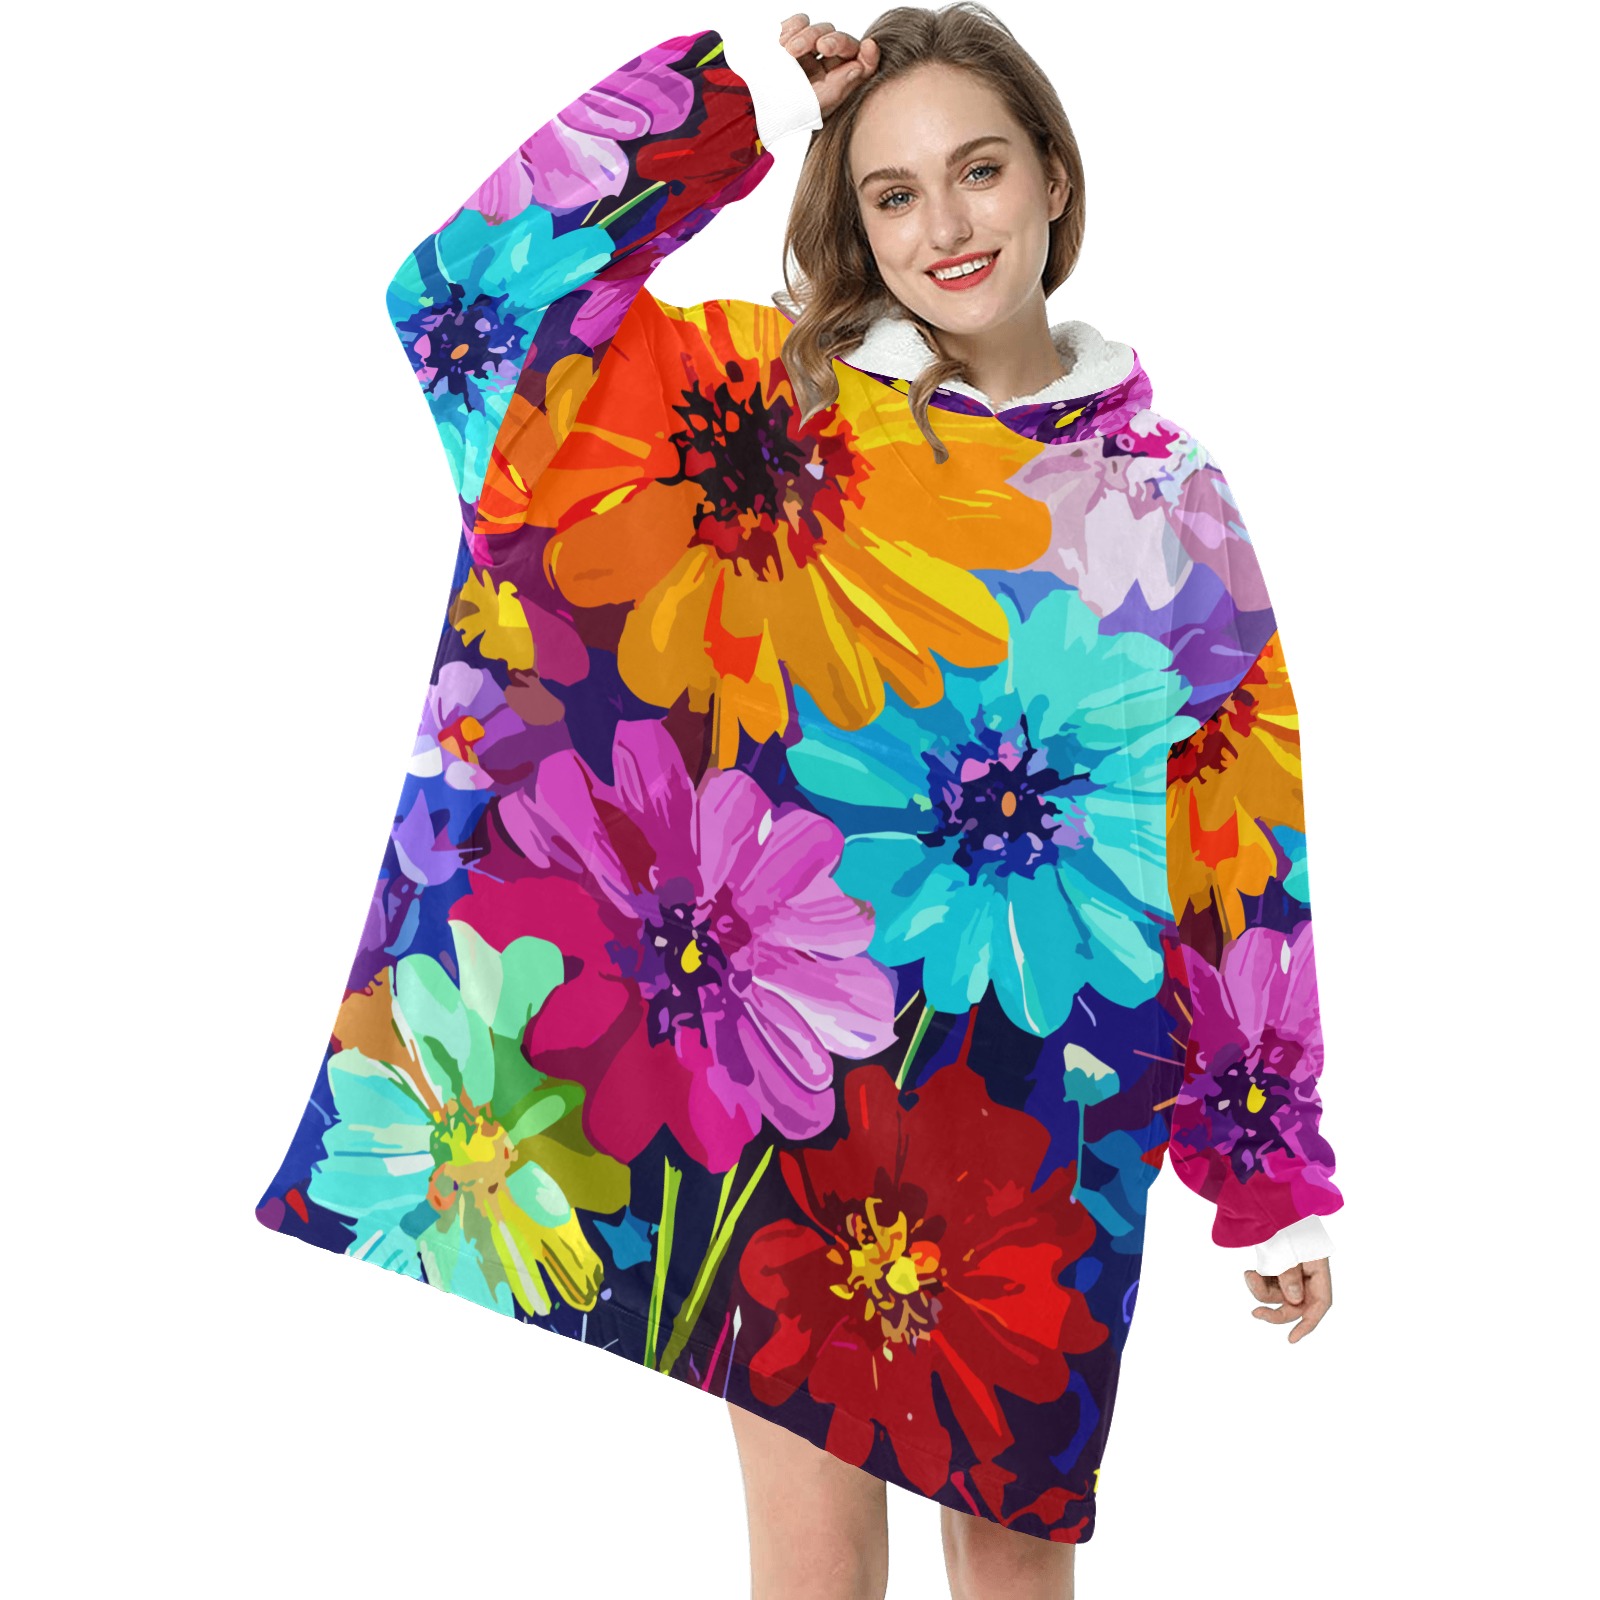 Bunch of colorful fantasy flowers positive art Blanket Hoodie for Women